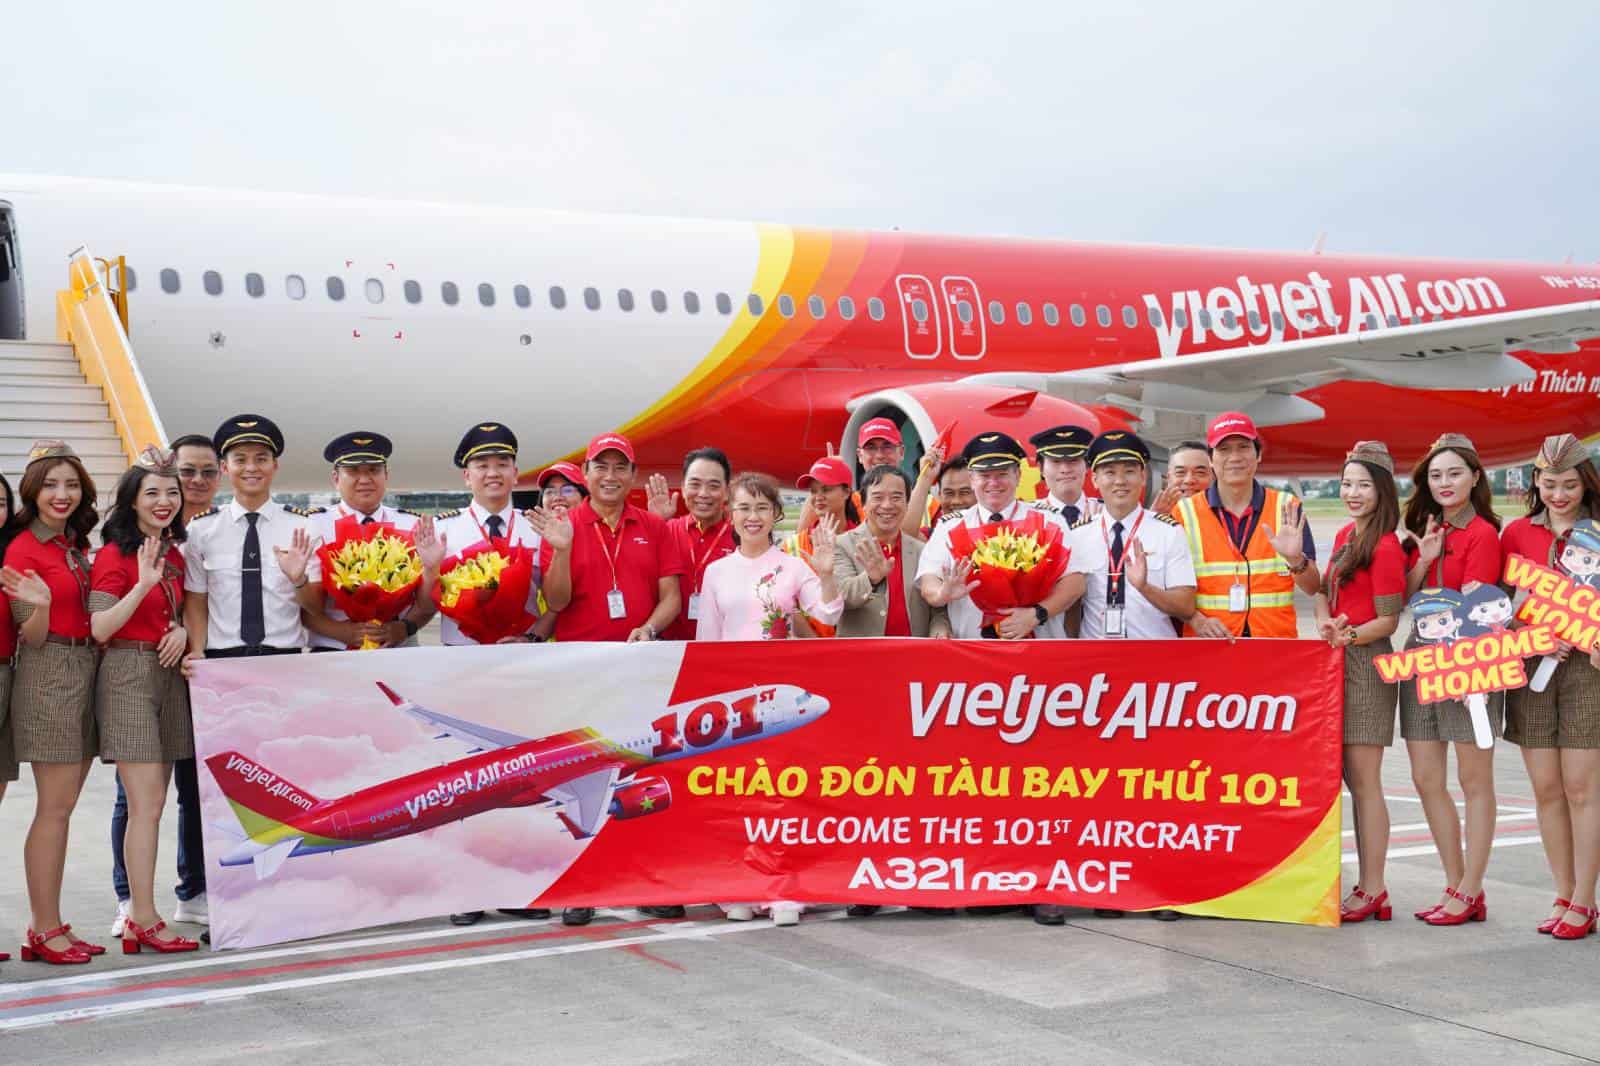 Vietjet’s aggressive fleet expansion continues with the arrival of the 101st aircraft in Vietnam